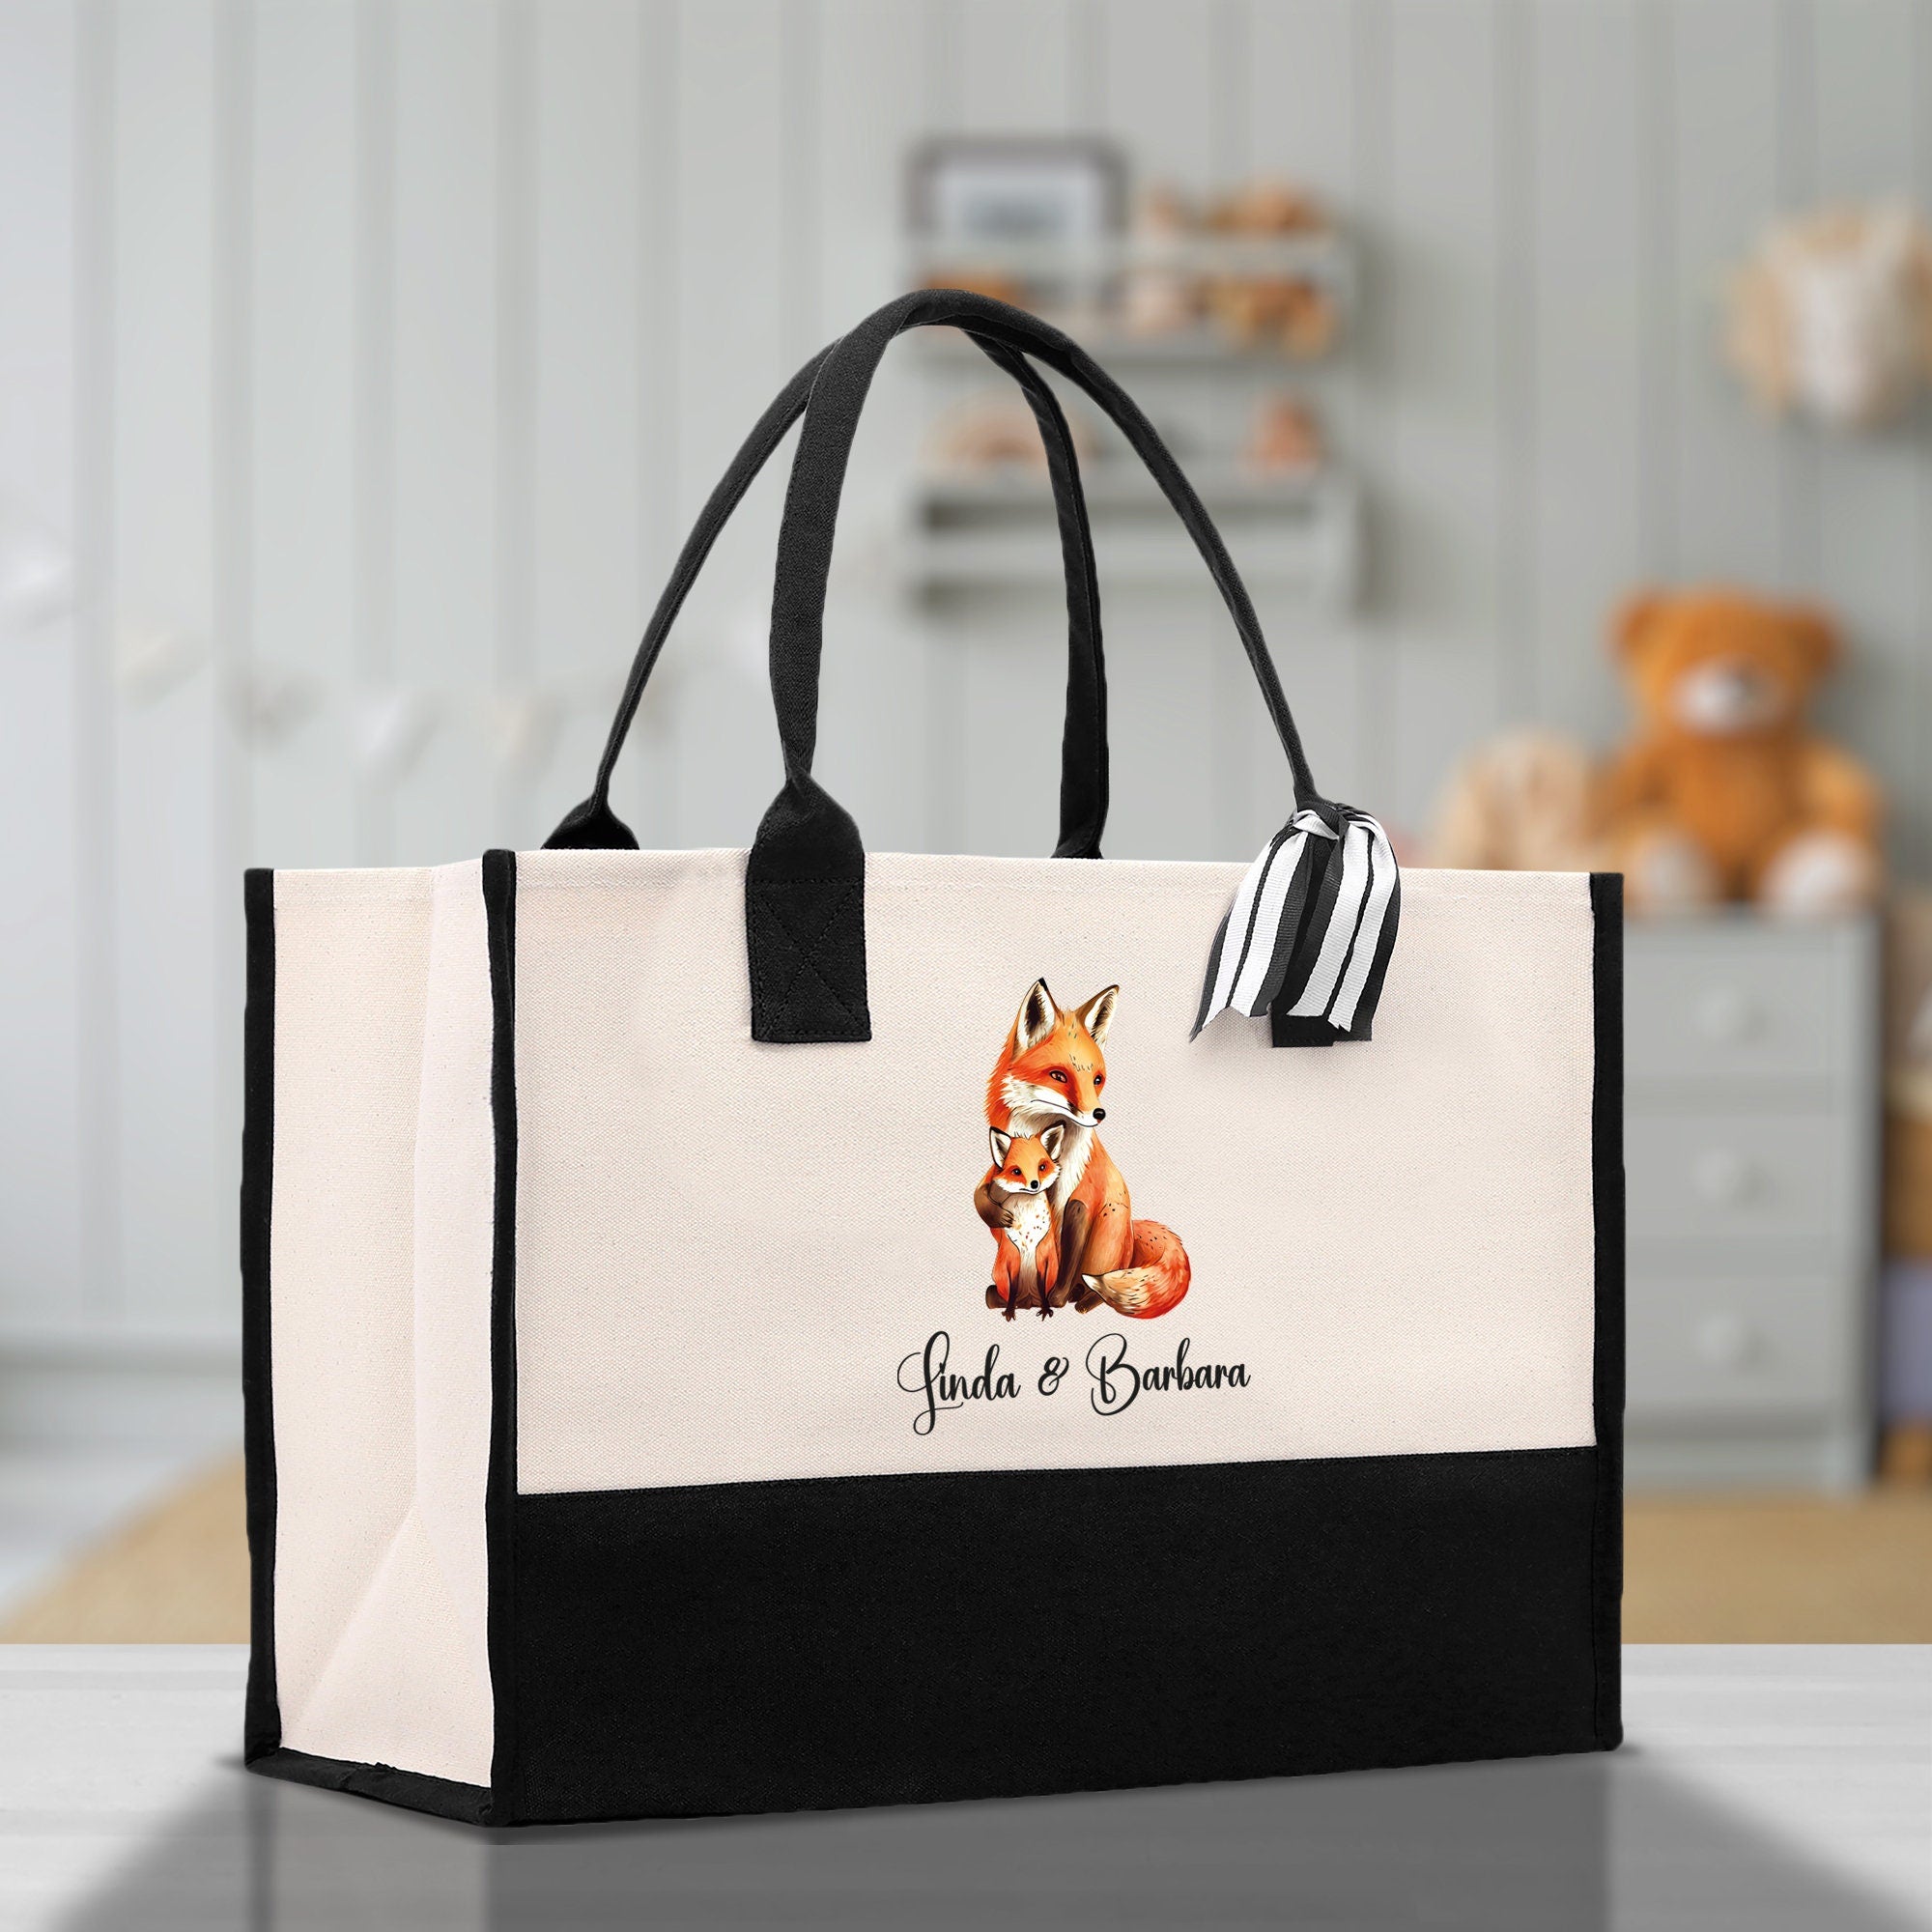 Fox Mom And Baby Name Custom Cotton Canvas Tote Bag Custom Pet Lover Gift Pet Portrait Bag Personalized Pet Owner Gift Tote Bag